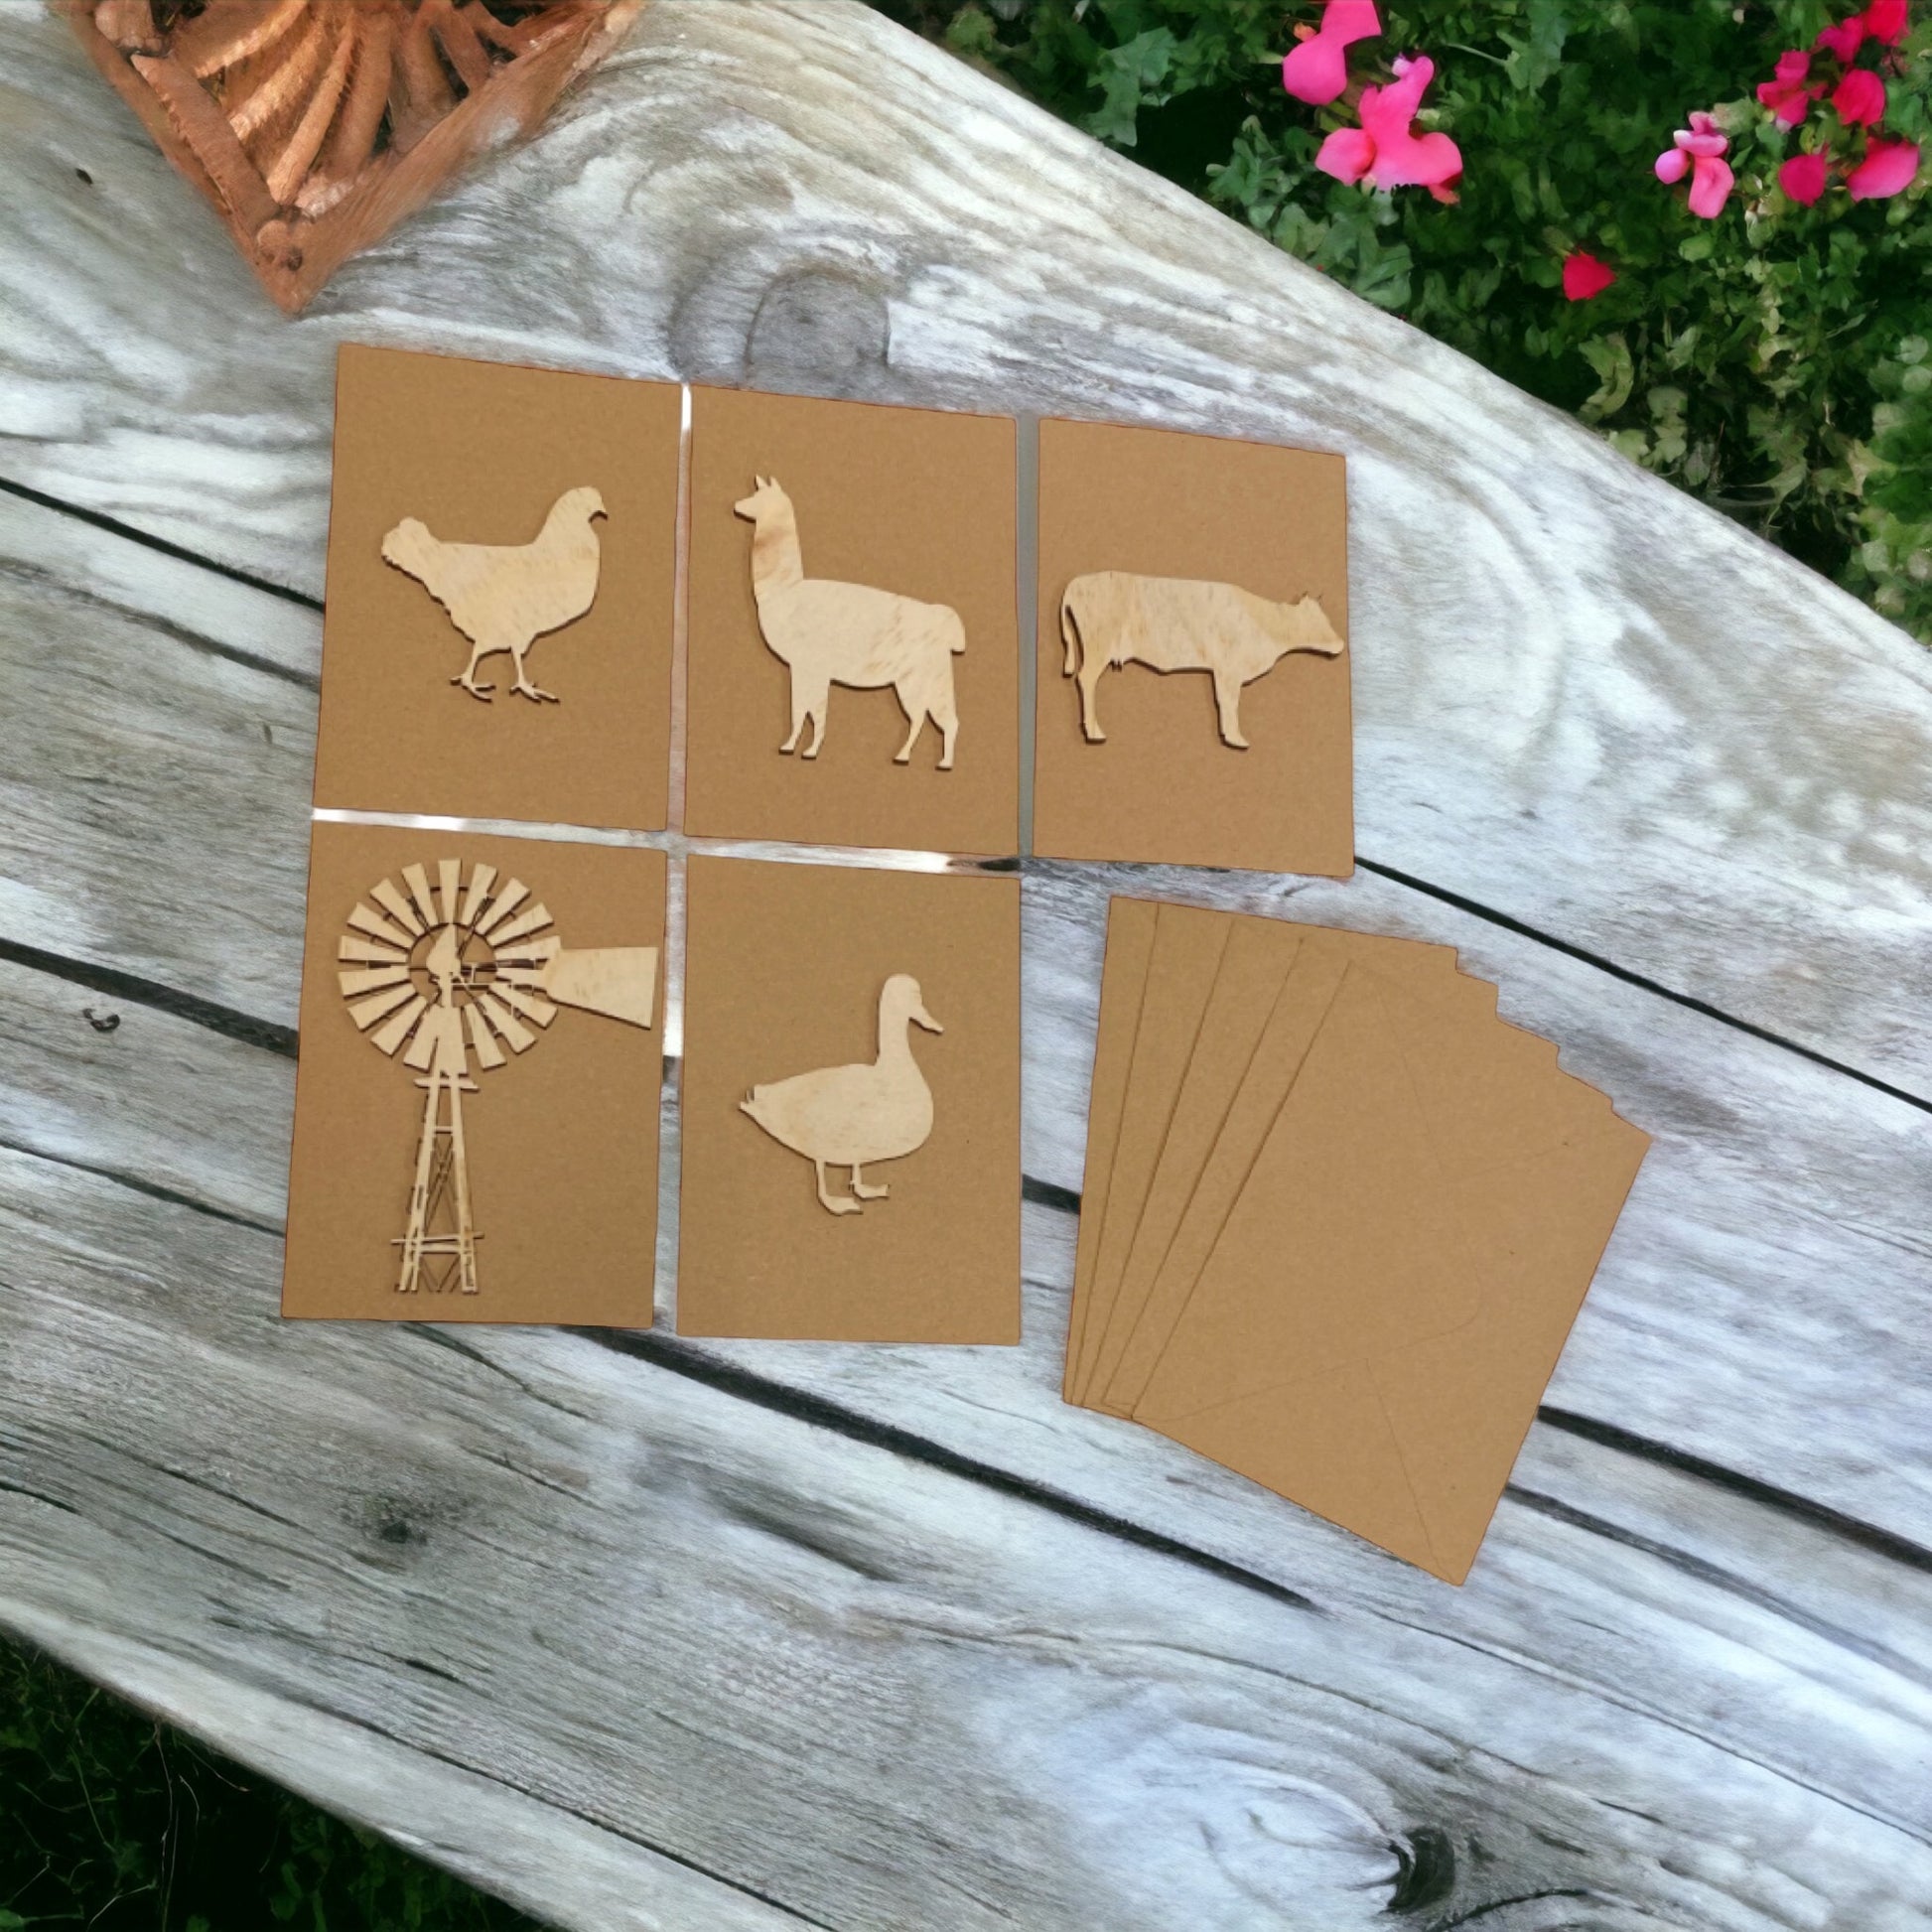 Card Envelope Greeting Set of 5 Country Farm - The Renmy Store Homewares & Gifts 